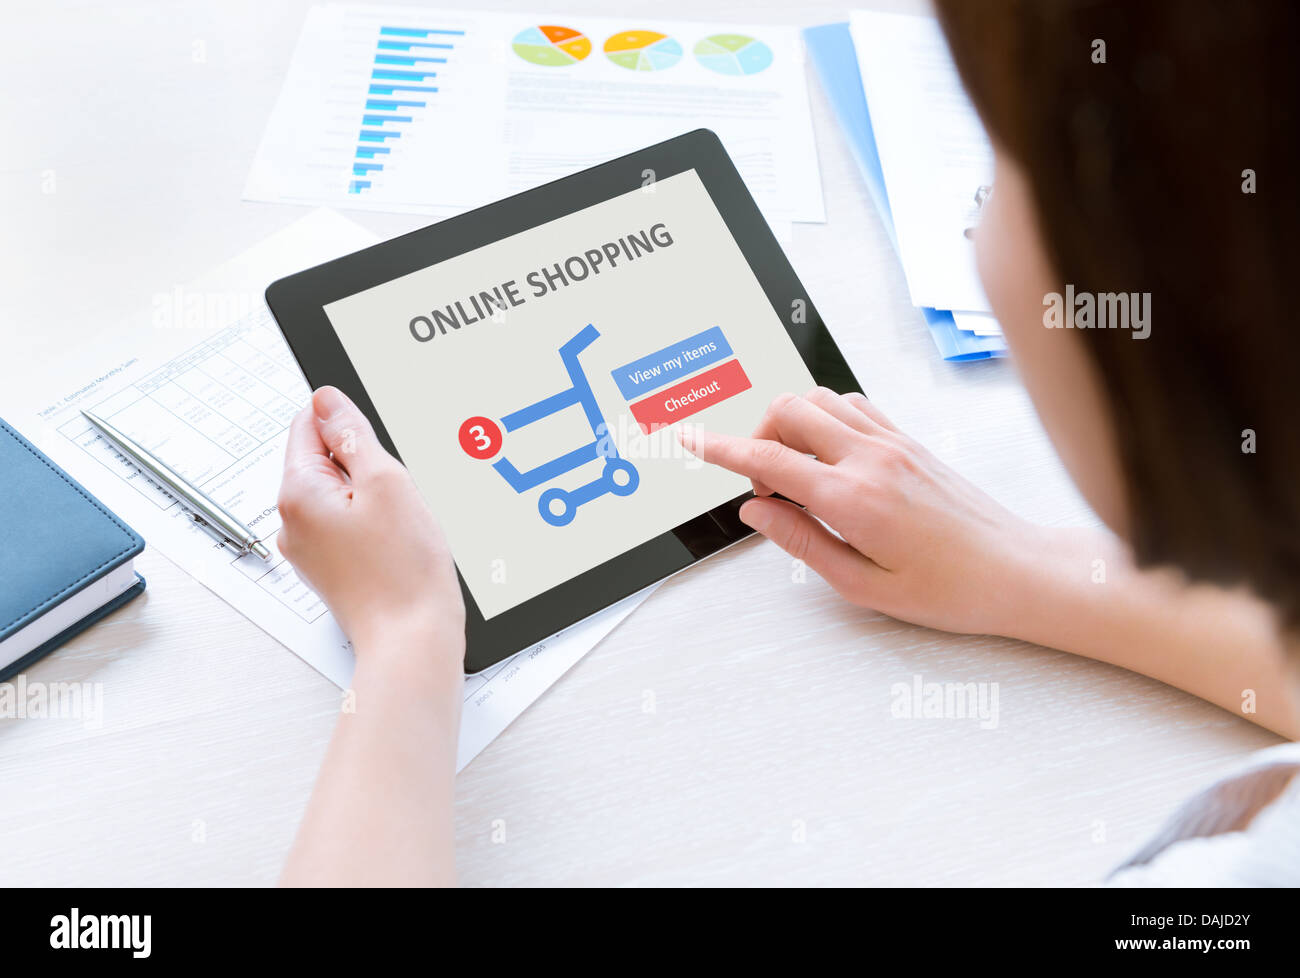 Business person makes a purchase through on-line shopping application on a modern digital tablet Stock Photo